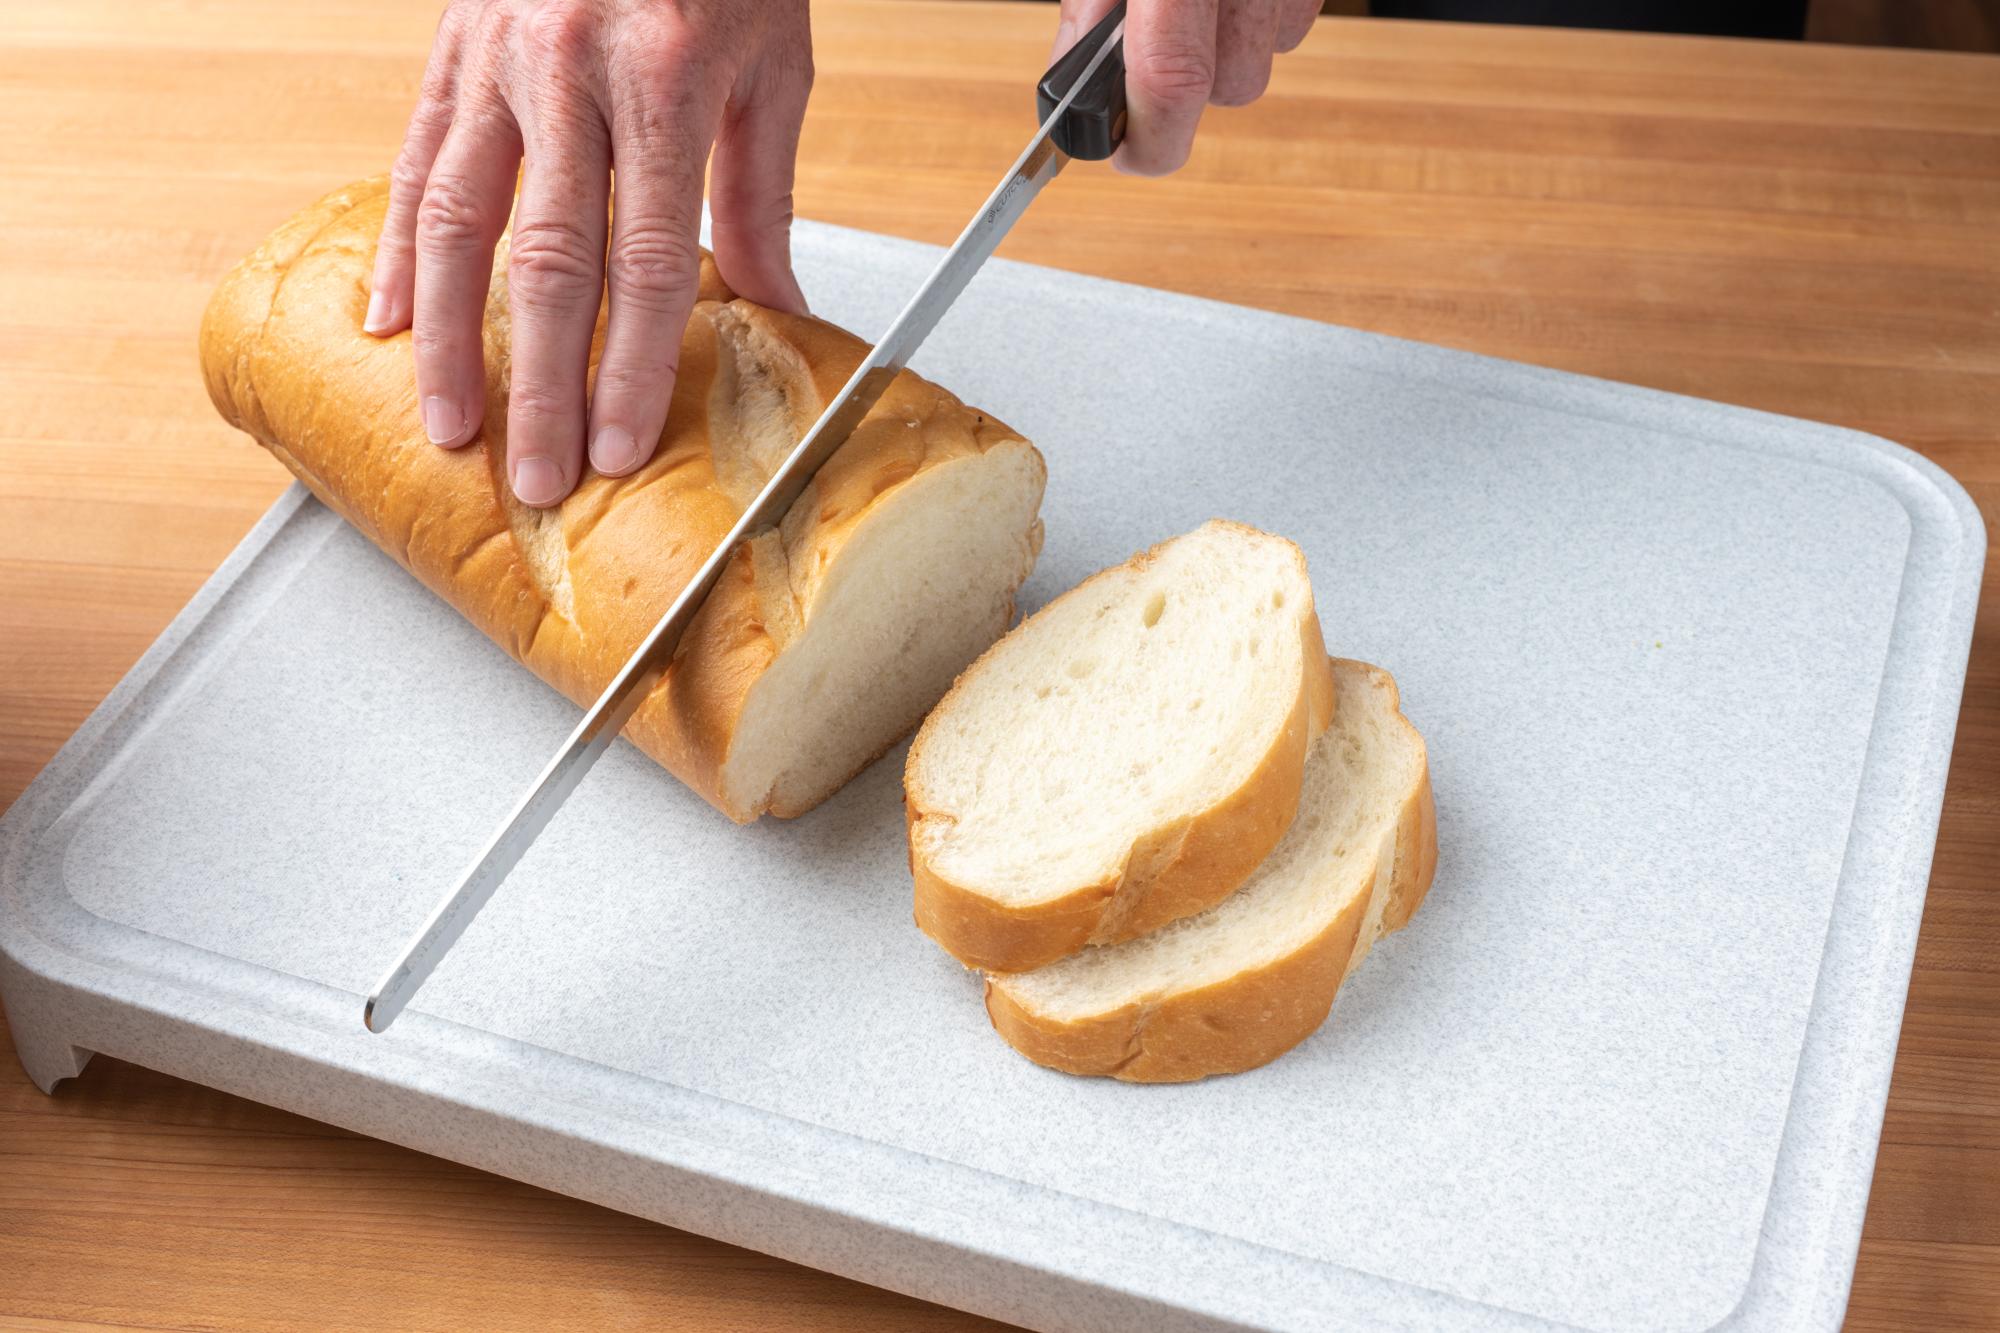 Slicing the bread.